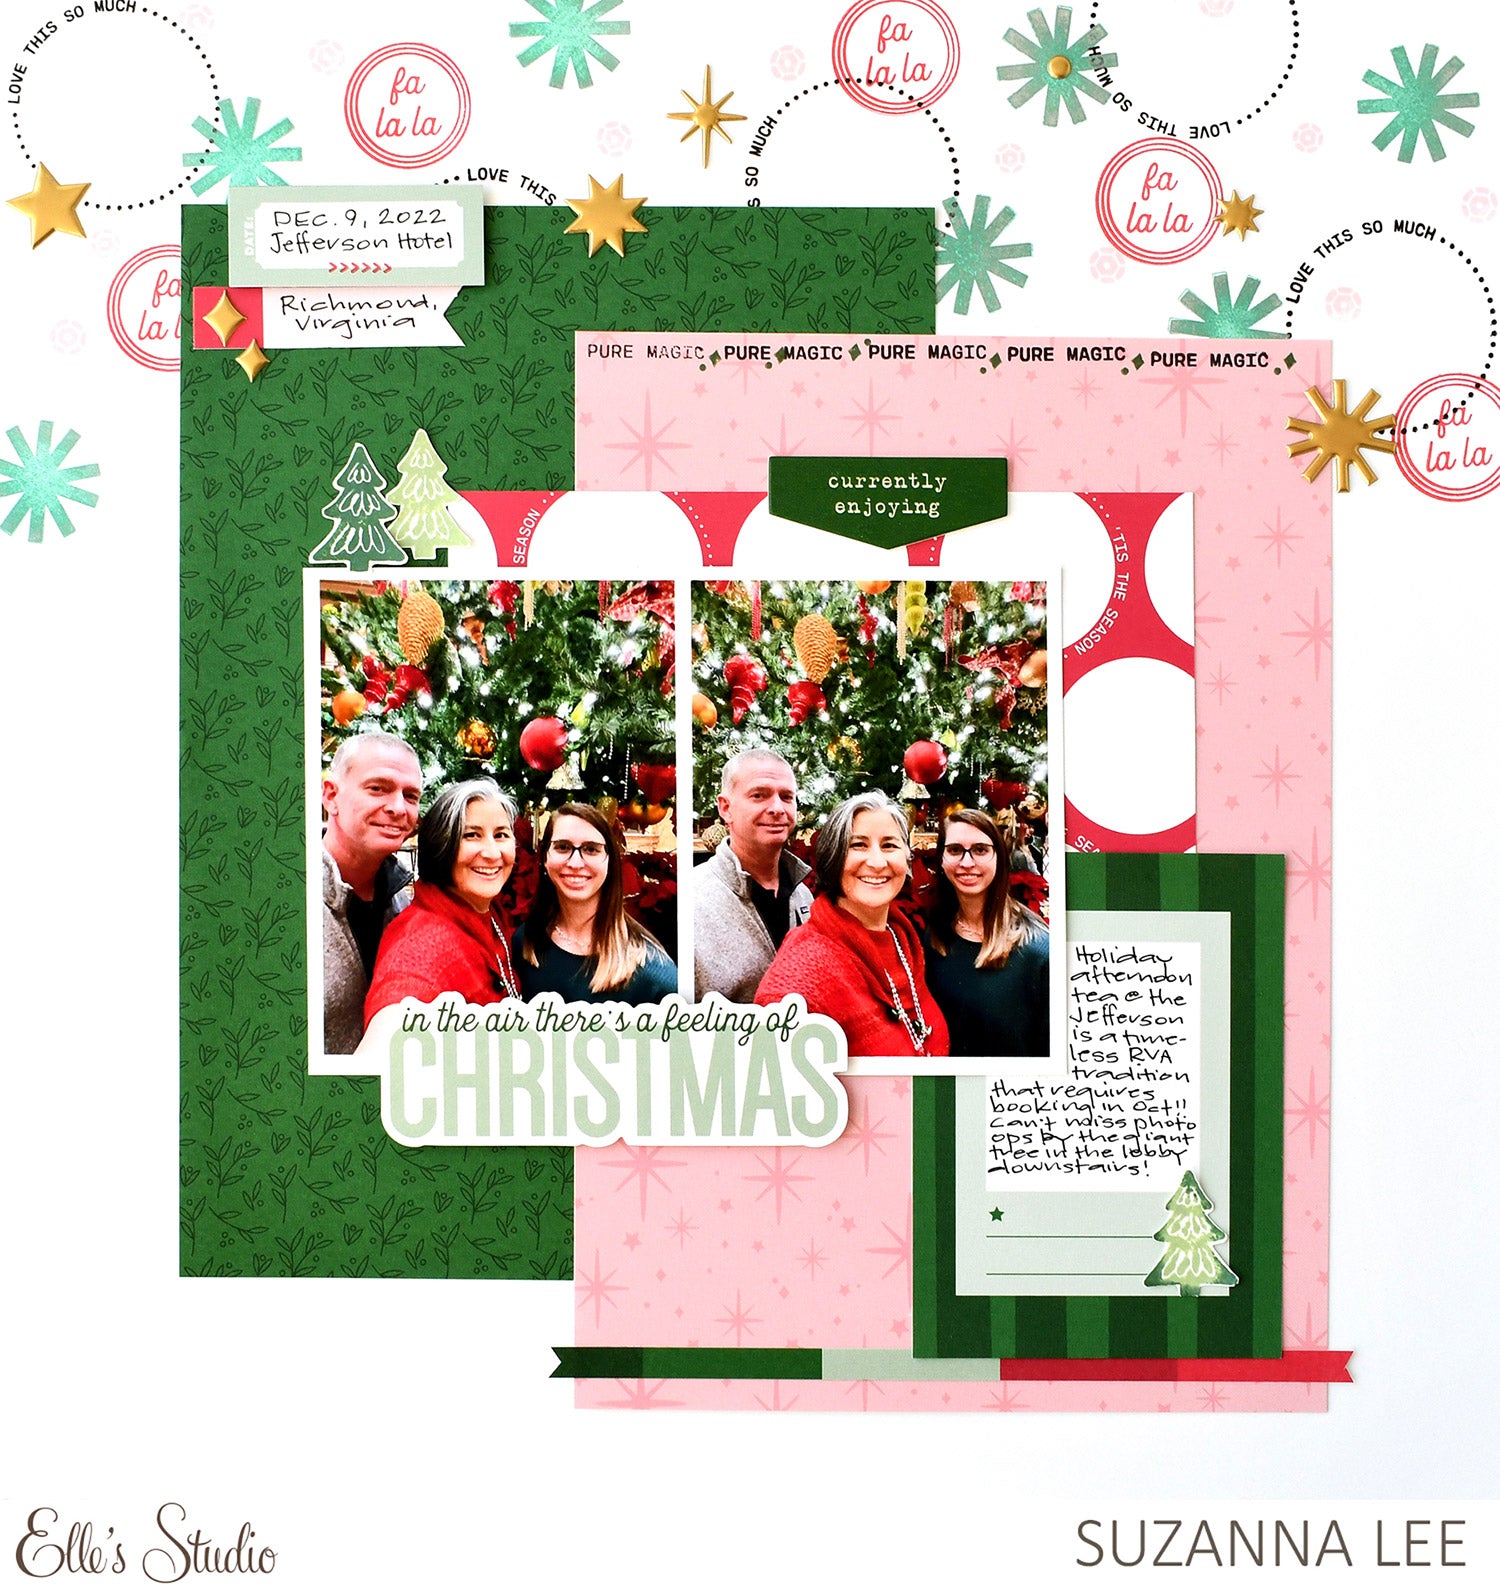 Elle's Studio - Scrapbooking paper, cards, stamps, and more!